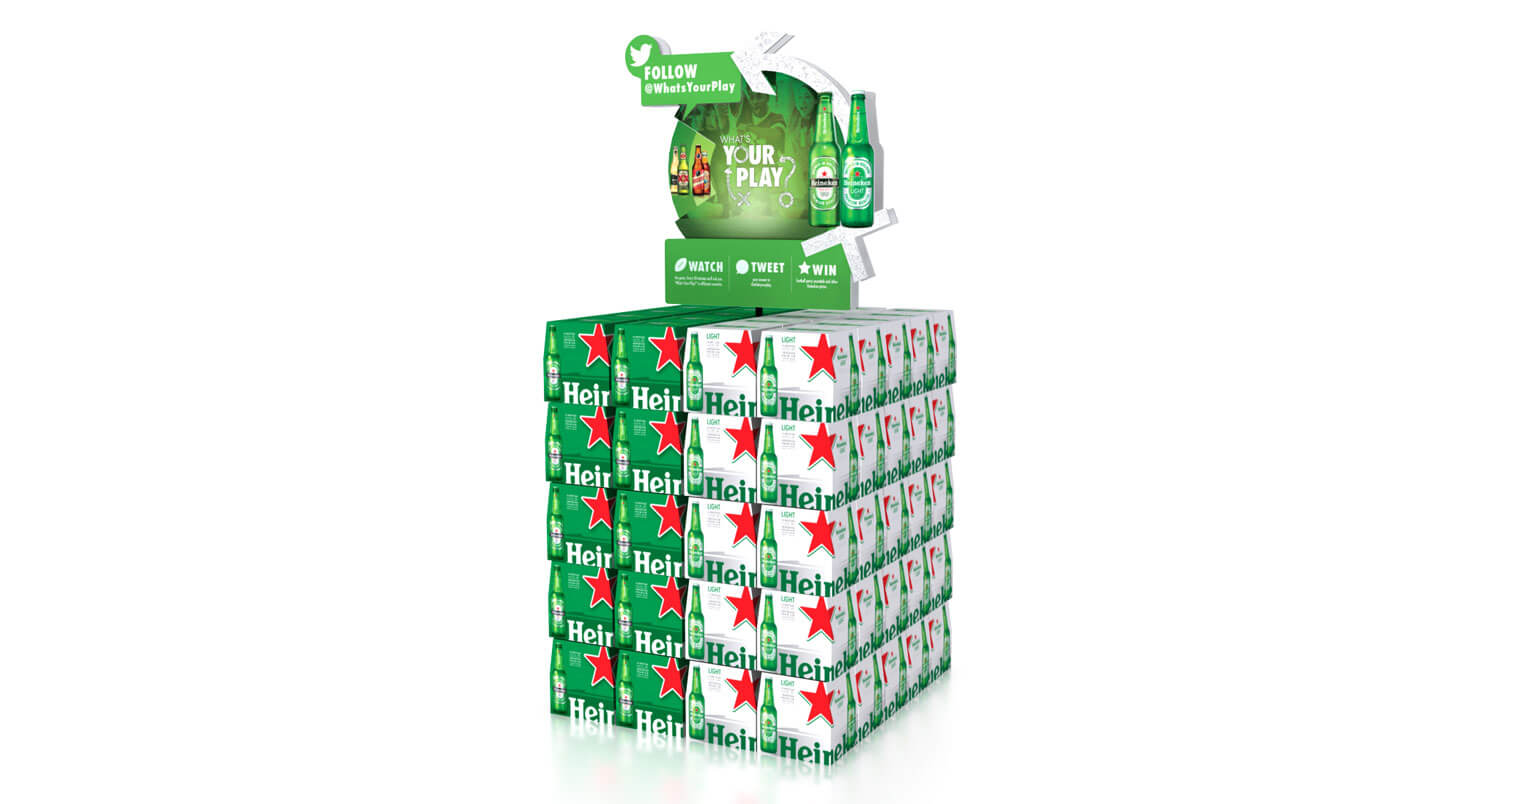 Heineken What's Your Play campaign boxes display